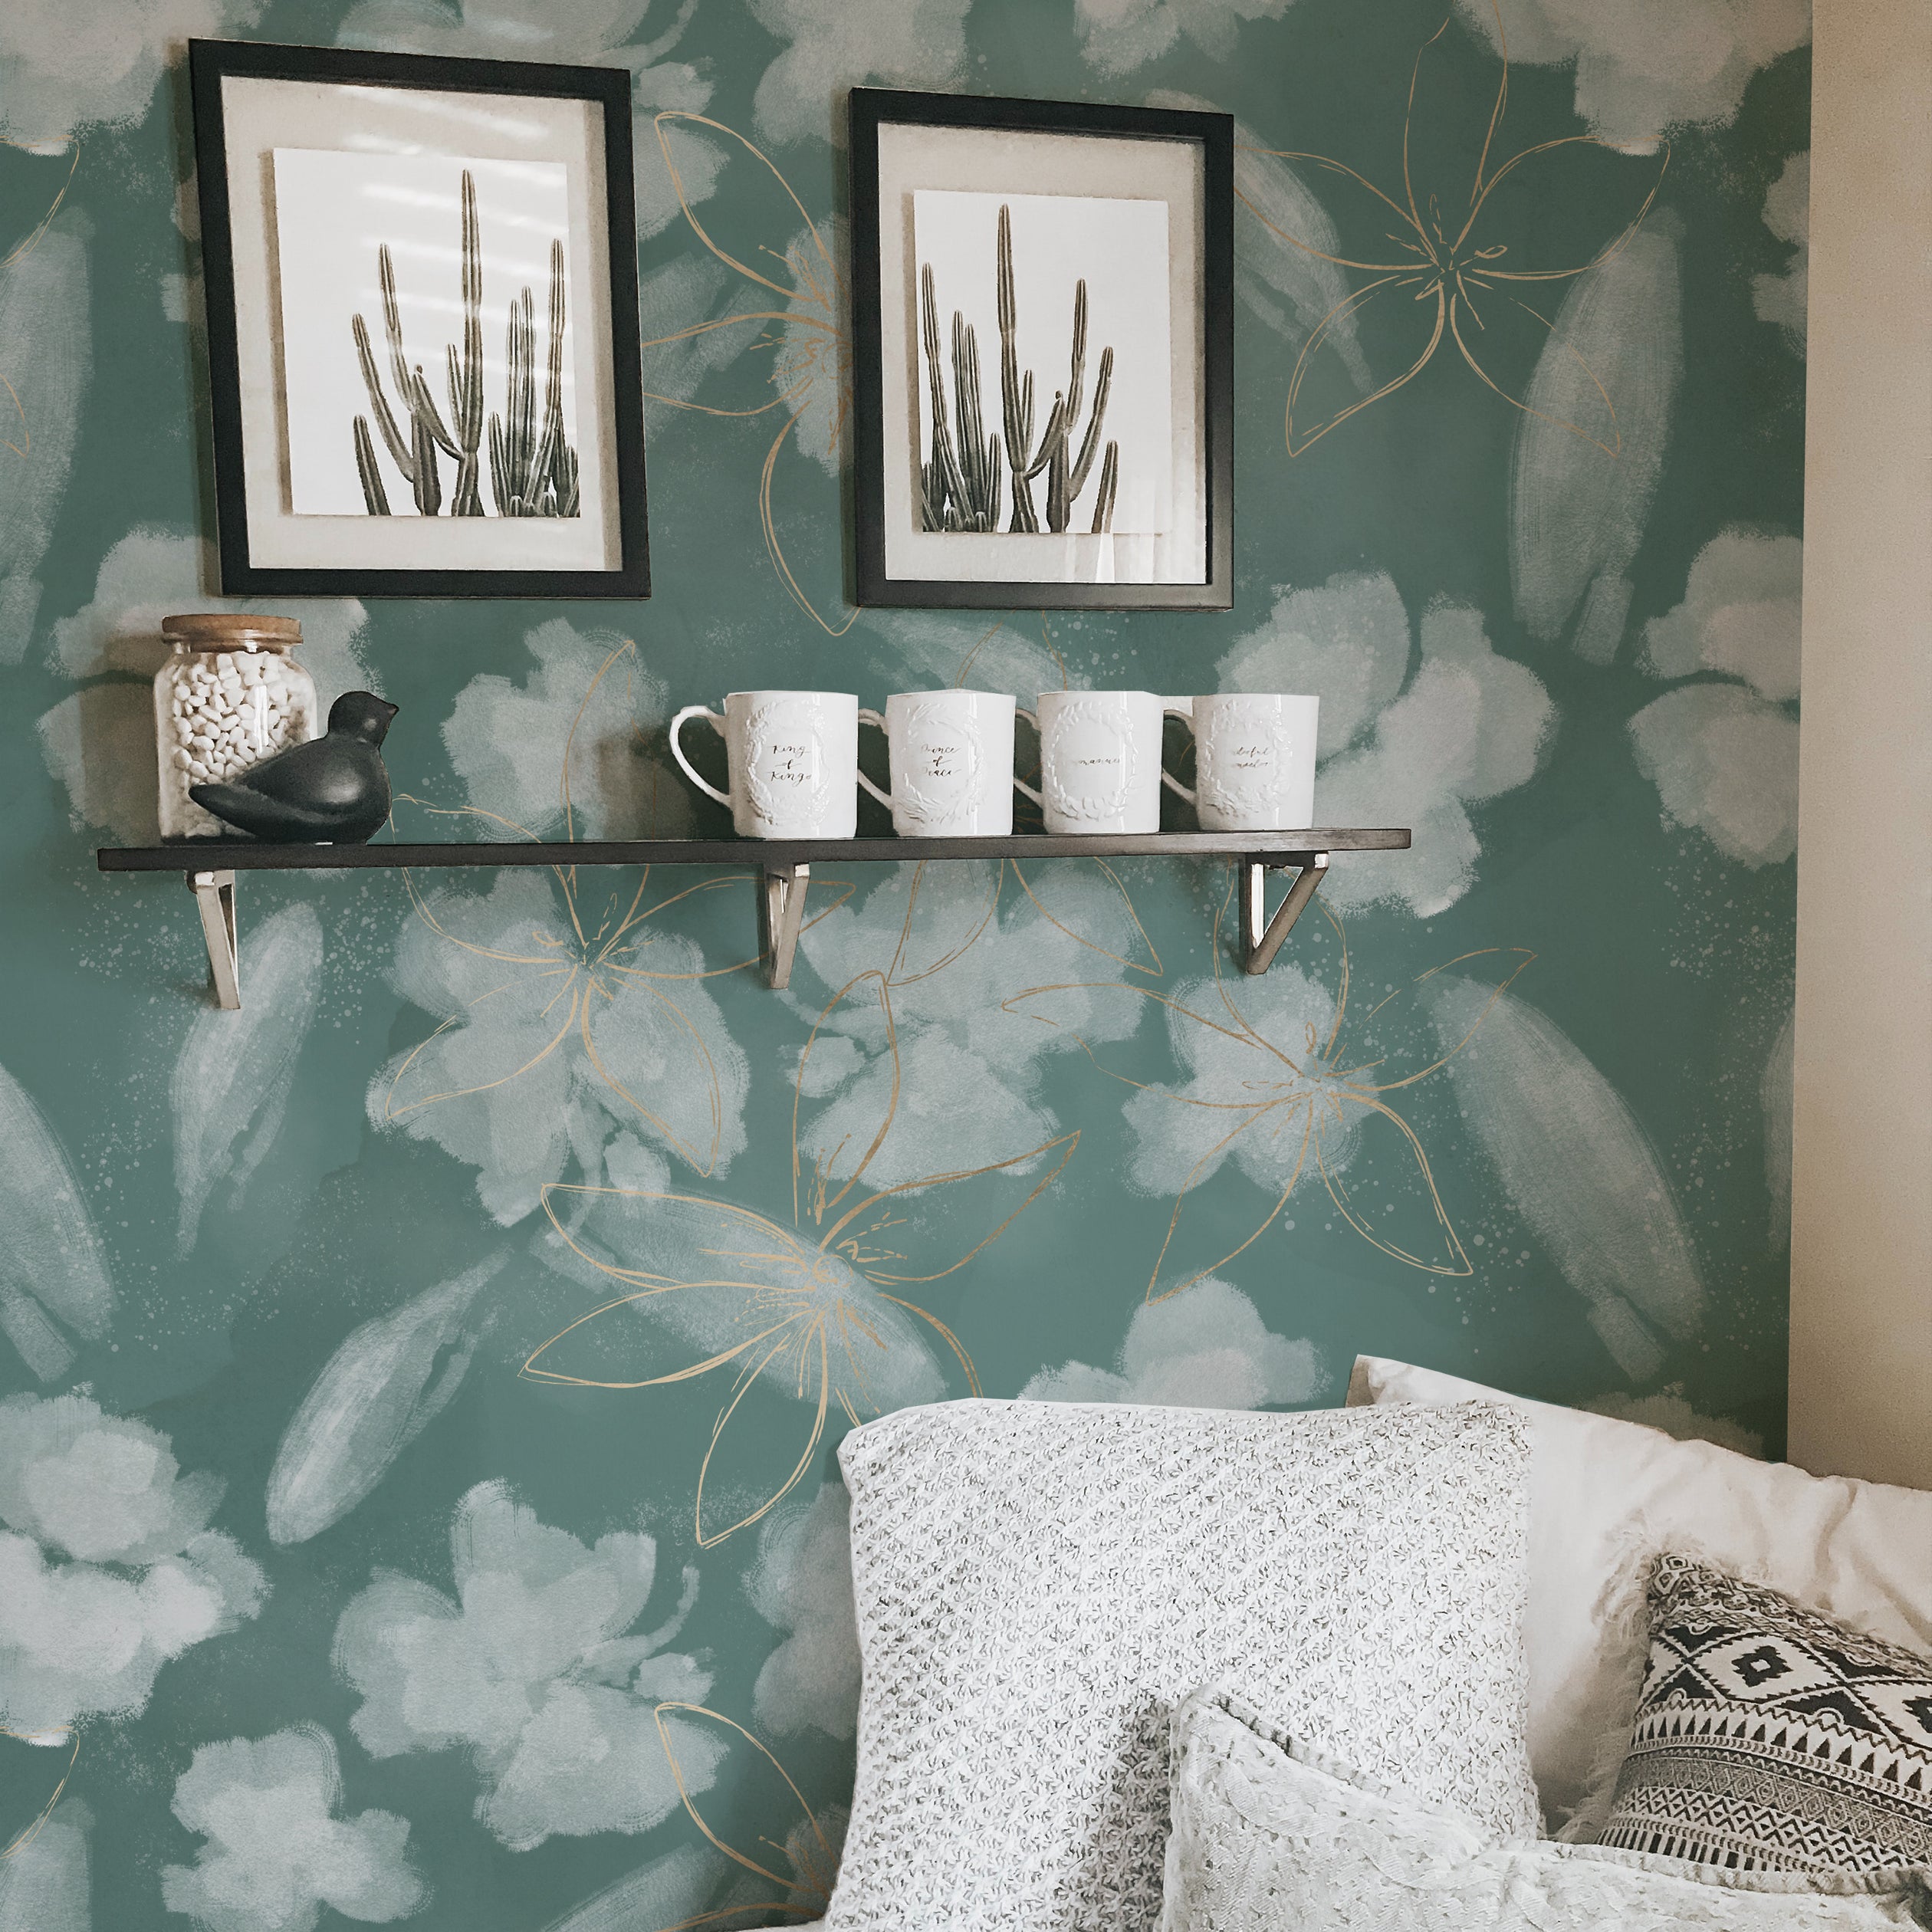 A cozy corner of a home decorated with Shimmer and Gold Wallpaper, enhancing the wall behind a floating shelf displaying cactus prints, assorted mugs, and a small decorative bird. The wallpaper's green backdrop and gold accents complement the earthy and neutral colors of the decor.